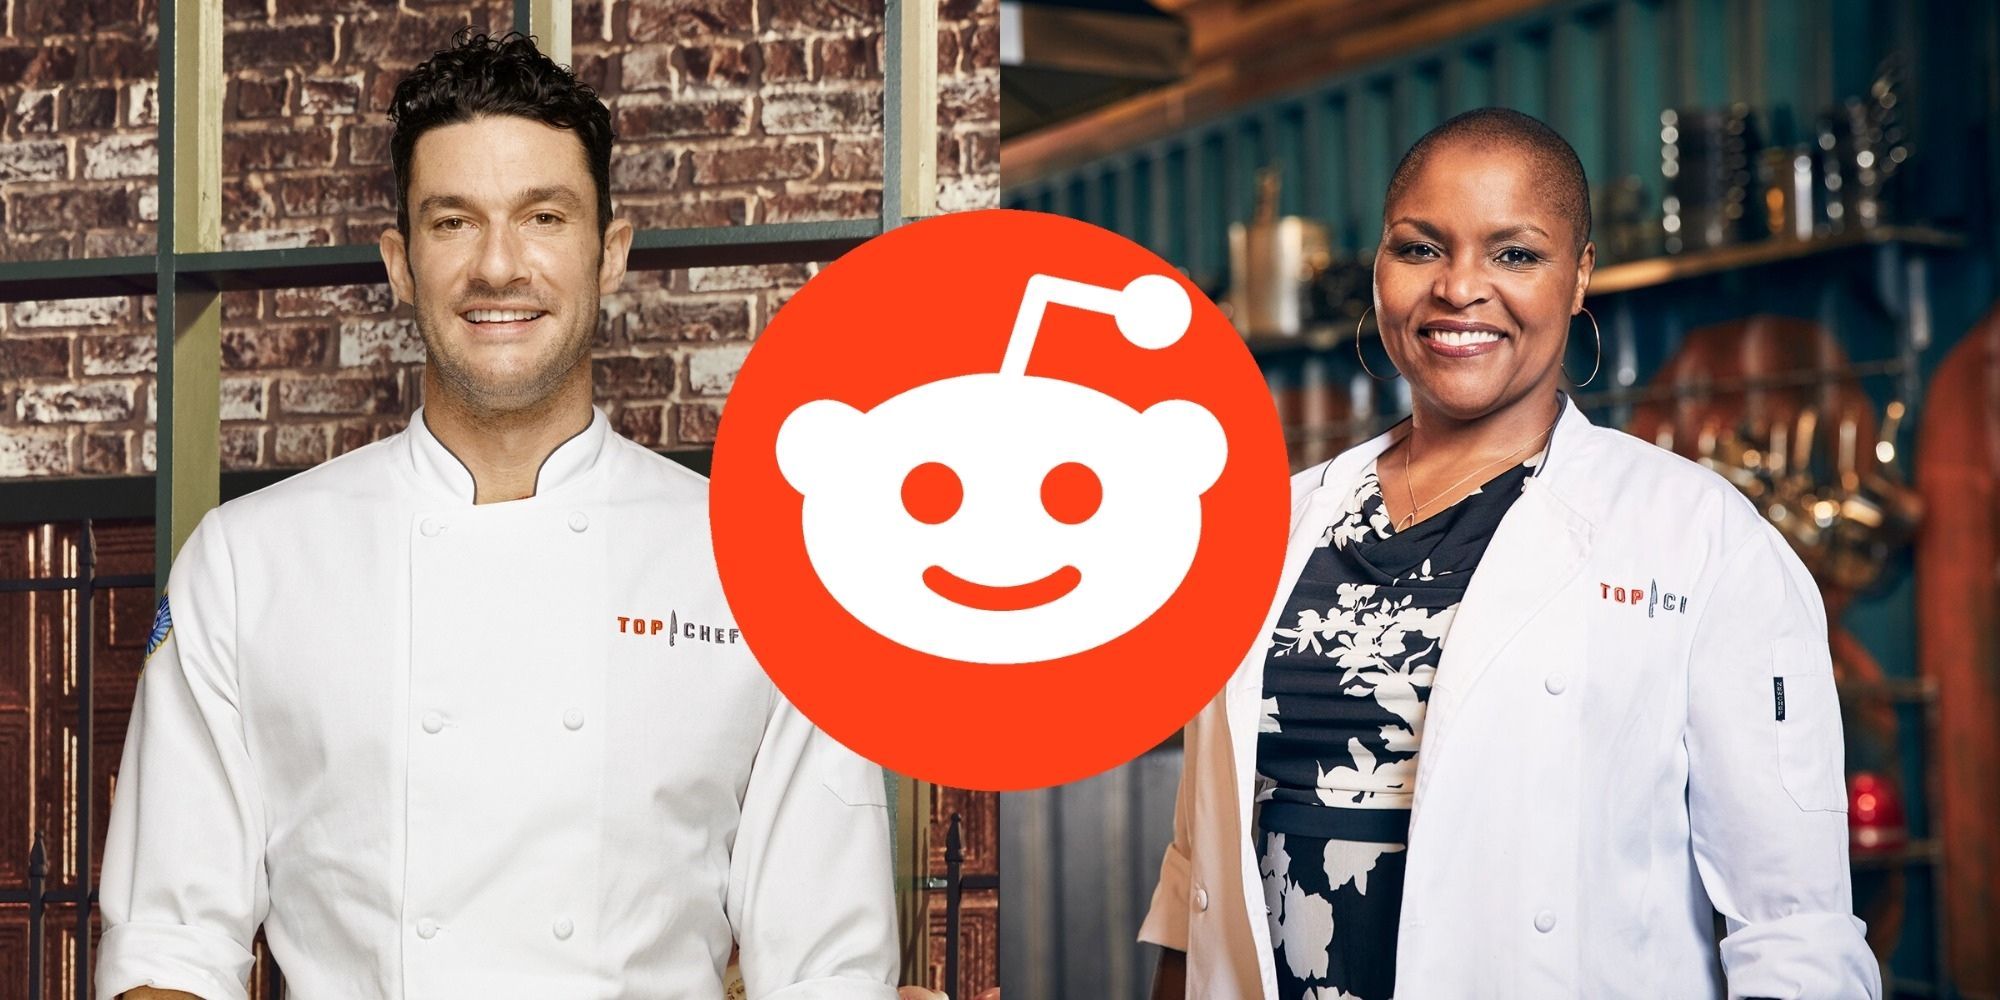 Sam Talbot and Tanya Holland in side by side images with the Reddit logo between them.